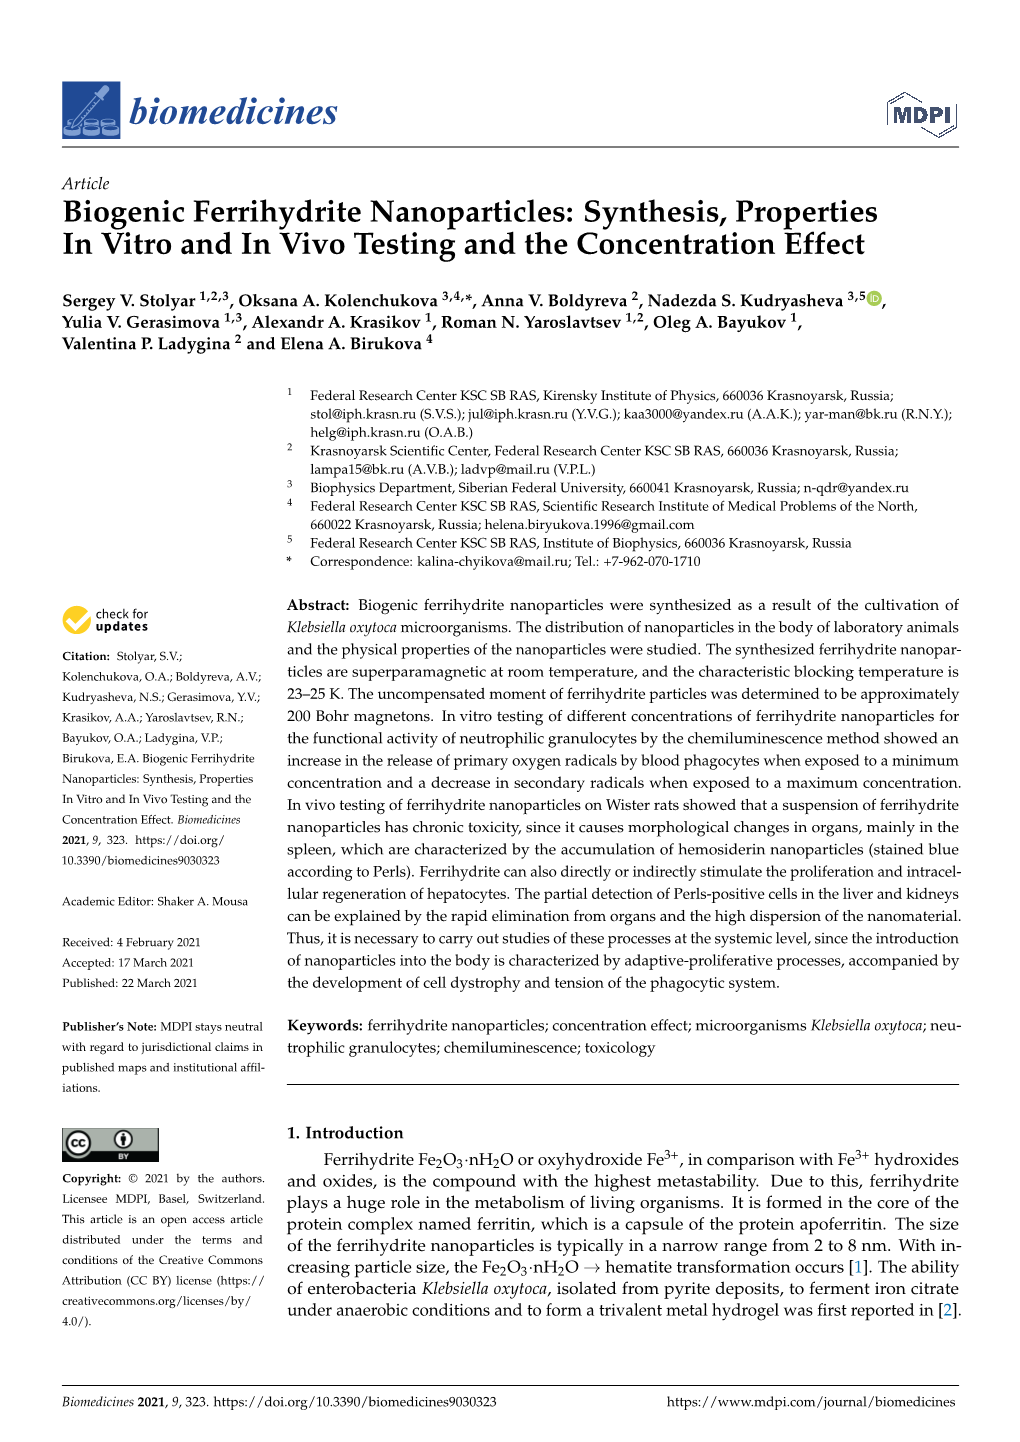 Biogenic Ferrihydrite Nanoparticles: Synthesis, Properties in Vitro and in Vivo Testing and the Concentration Effect